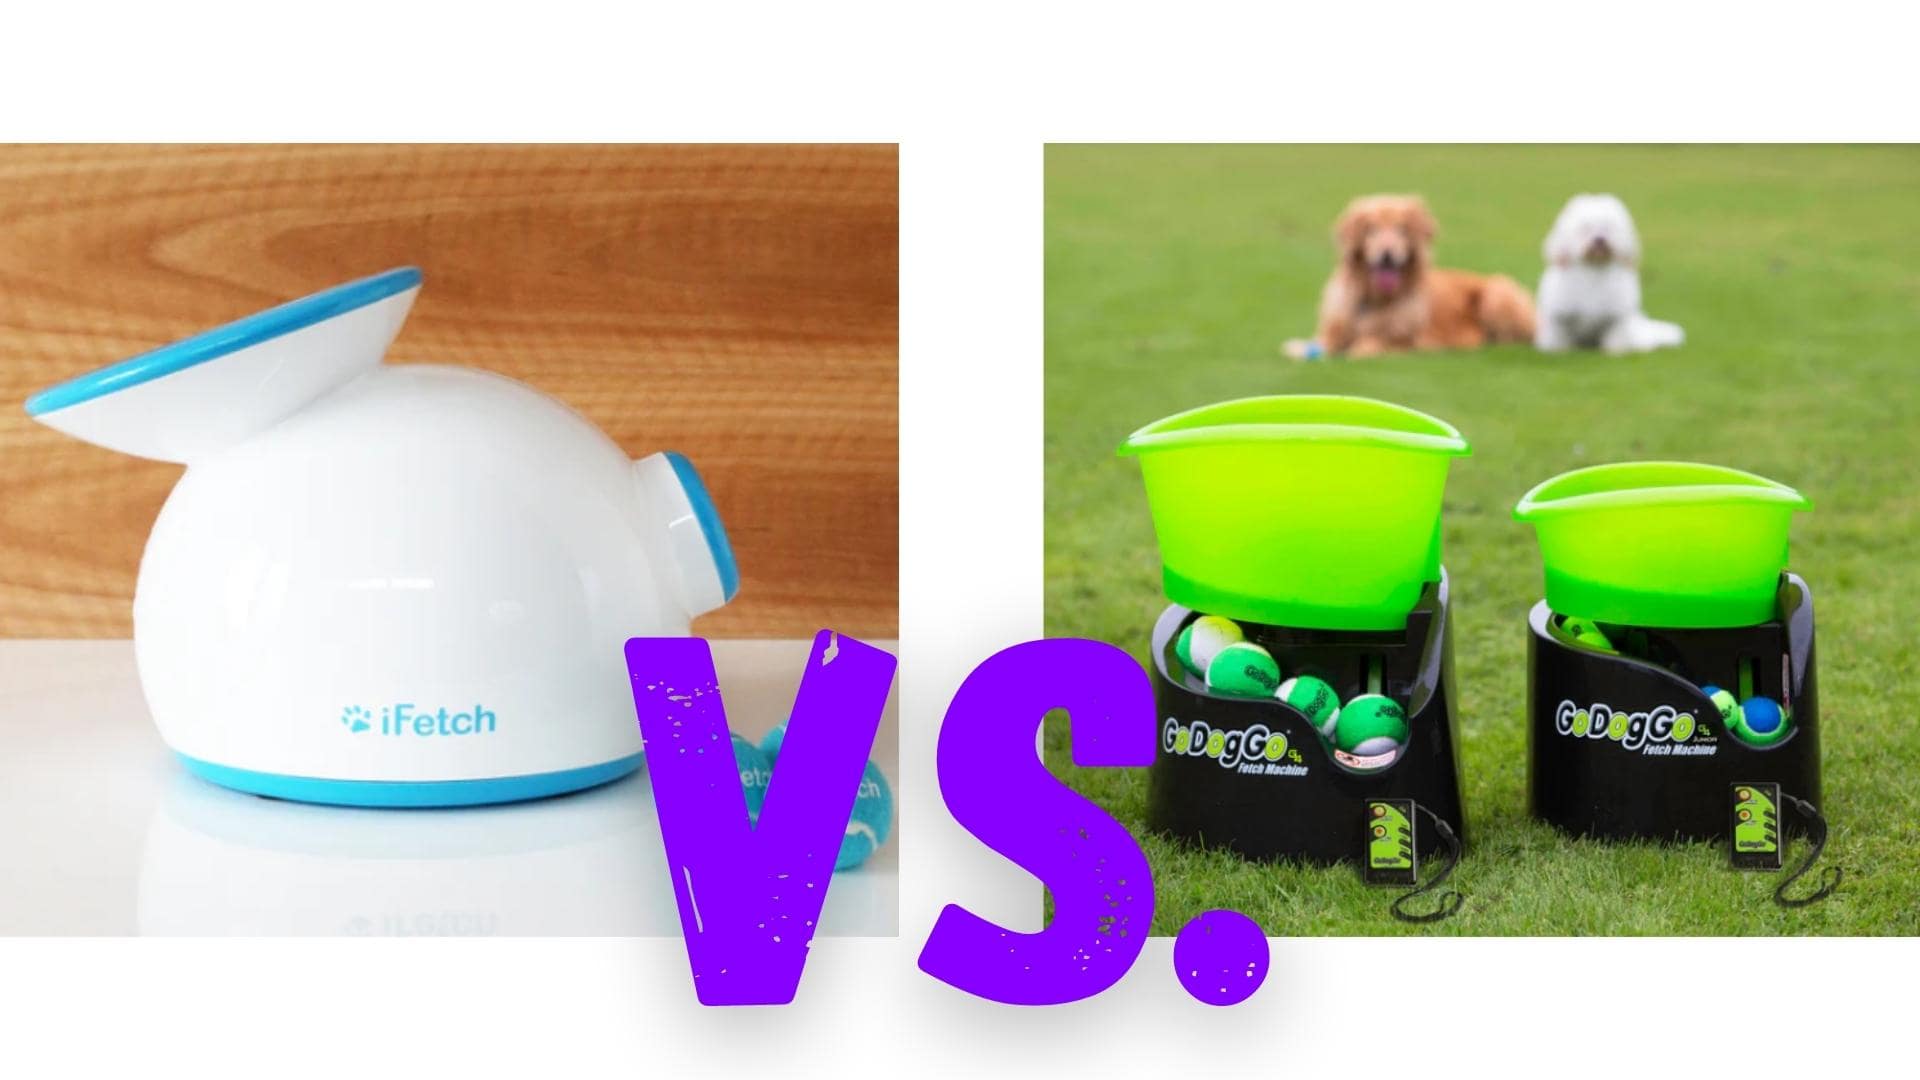 iFetch Vs. GoDogGo: Which Is The Better Ball Launcher?